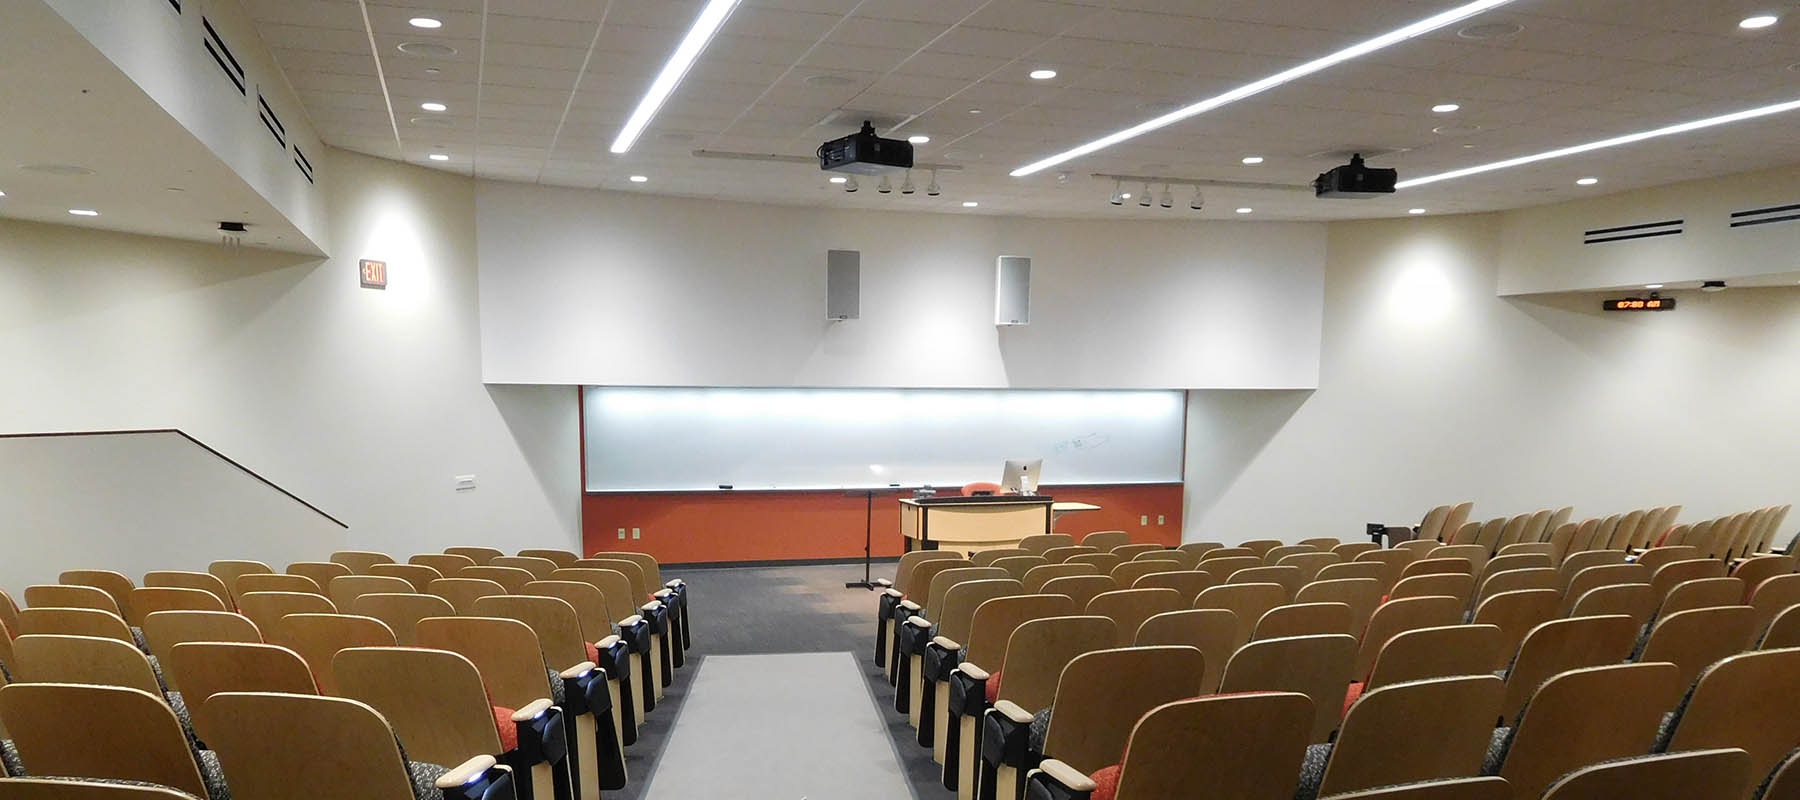 A lecture room at UW Oshkosh with recessed ceiling lights, projectors and audio system